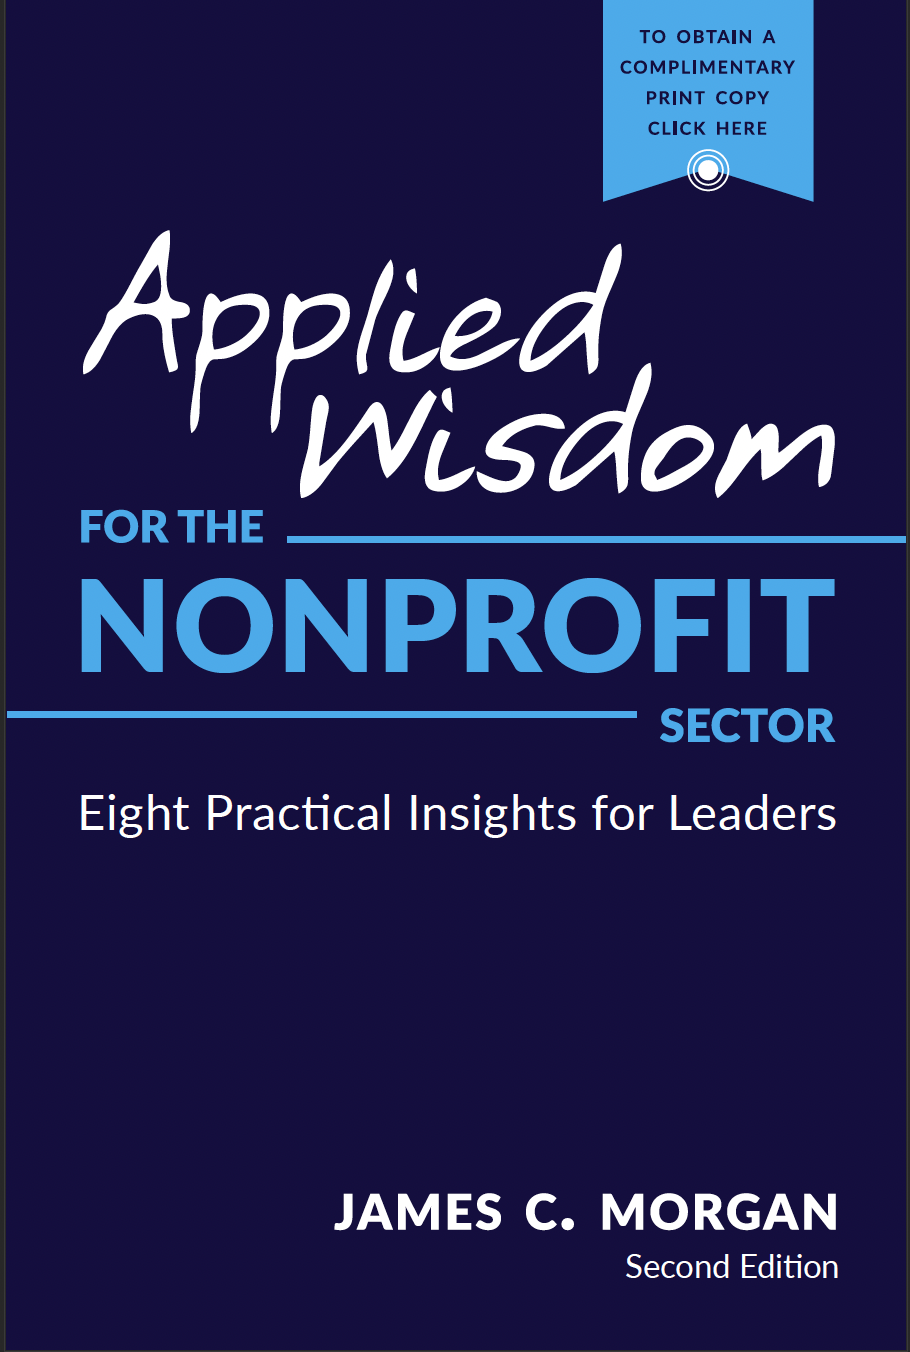 Applied Wisdom for the Nonprofit Book Cover